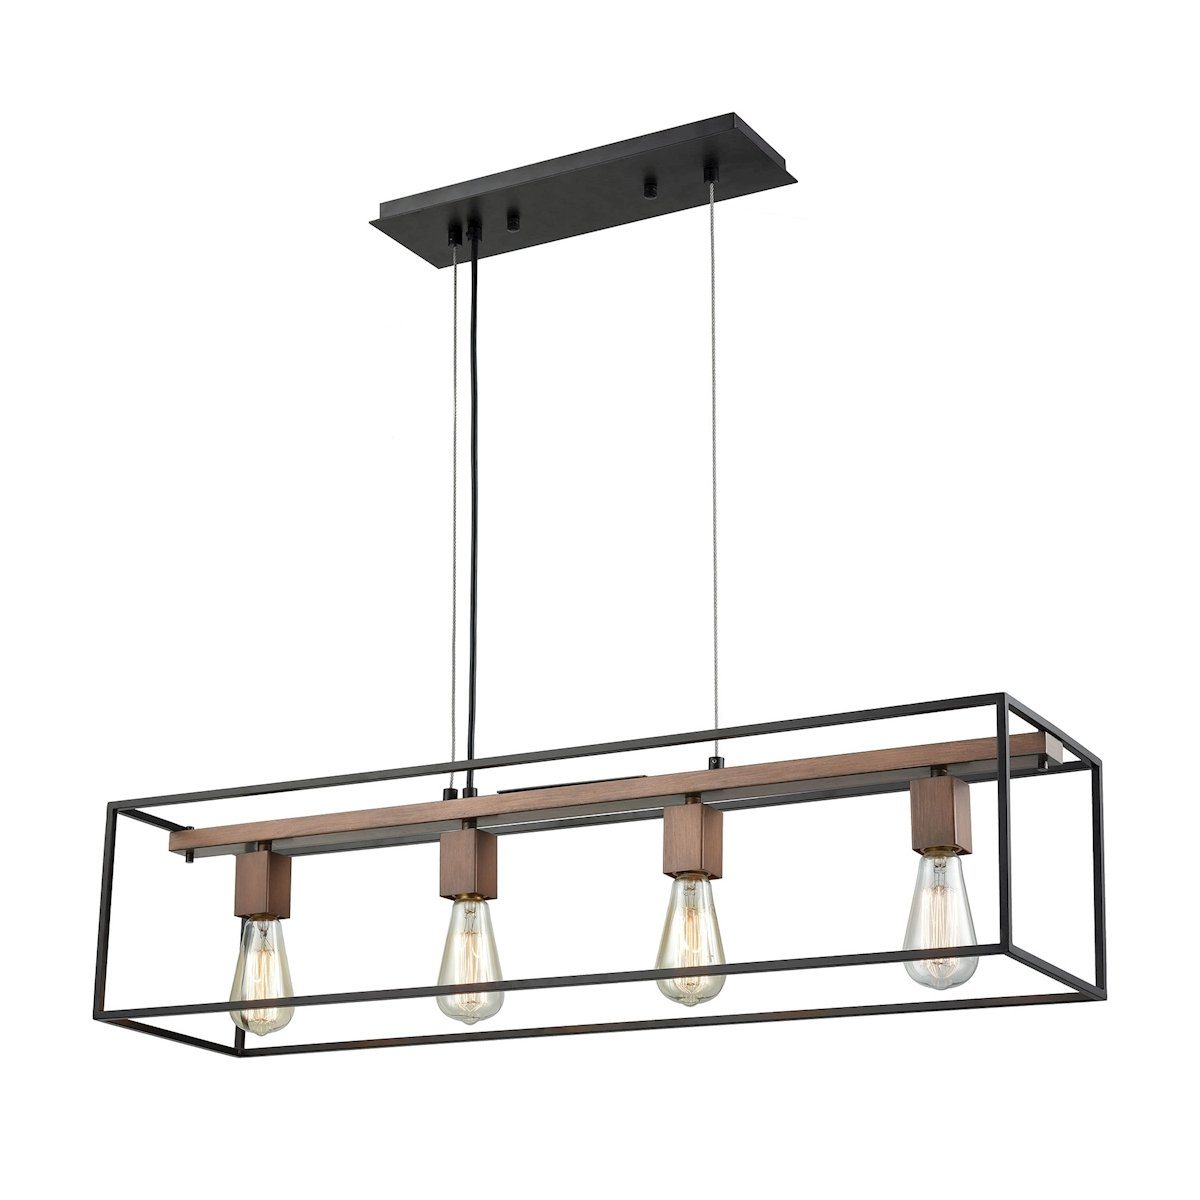 Rigby 4 Light Chandelier In Oil Rubbed Bronze And Tarnished Brass Ceiling Elk Lighting 